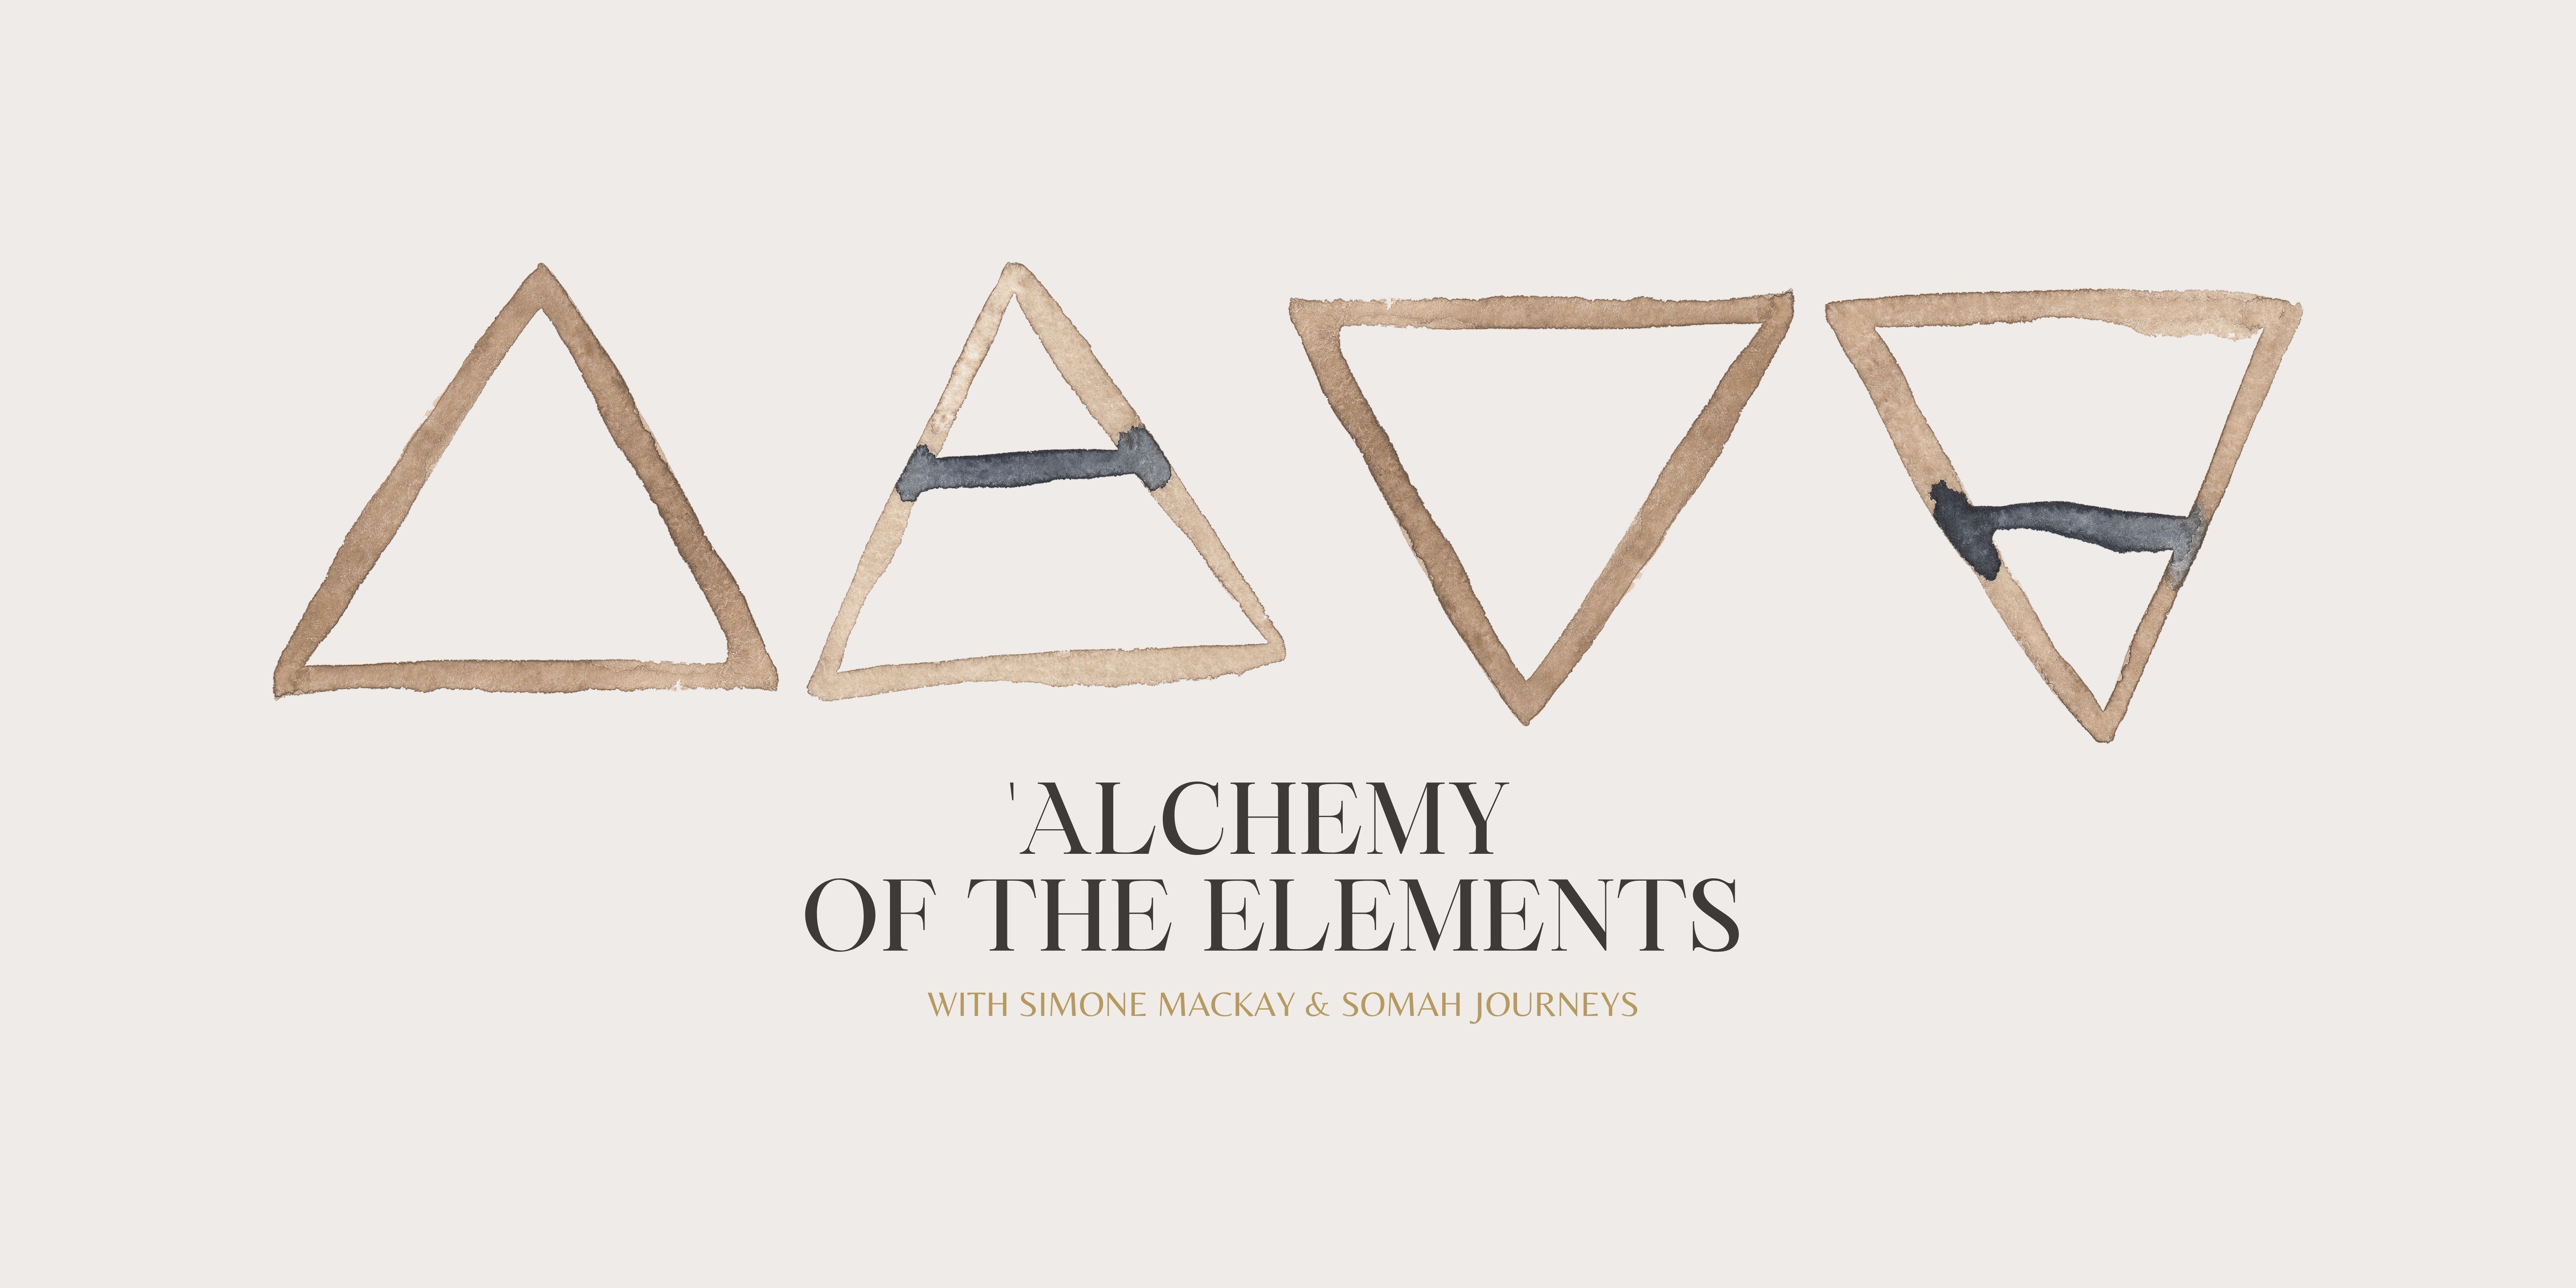 Alchemy of the elements